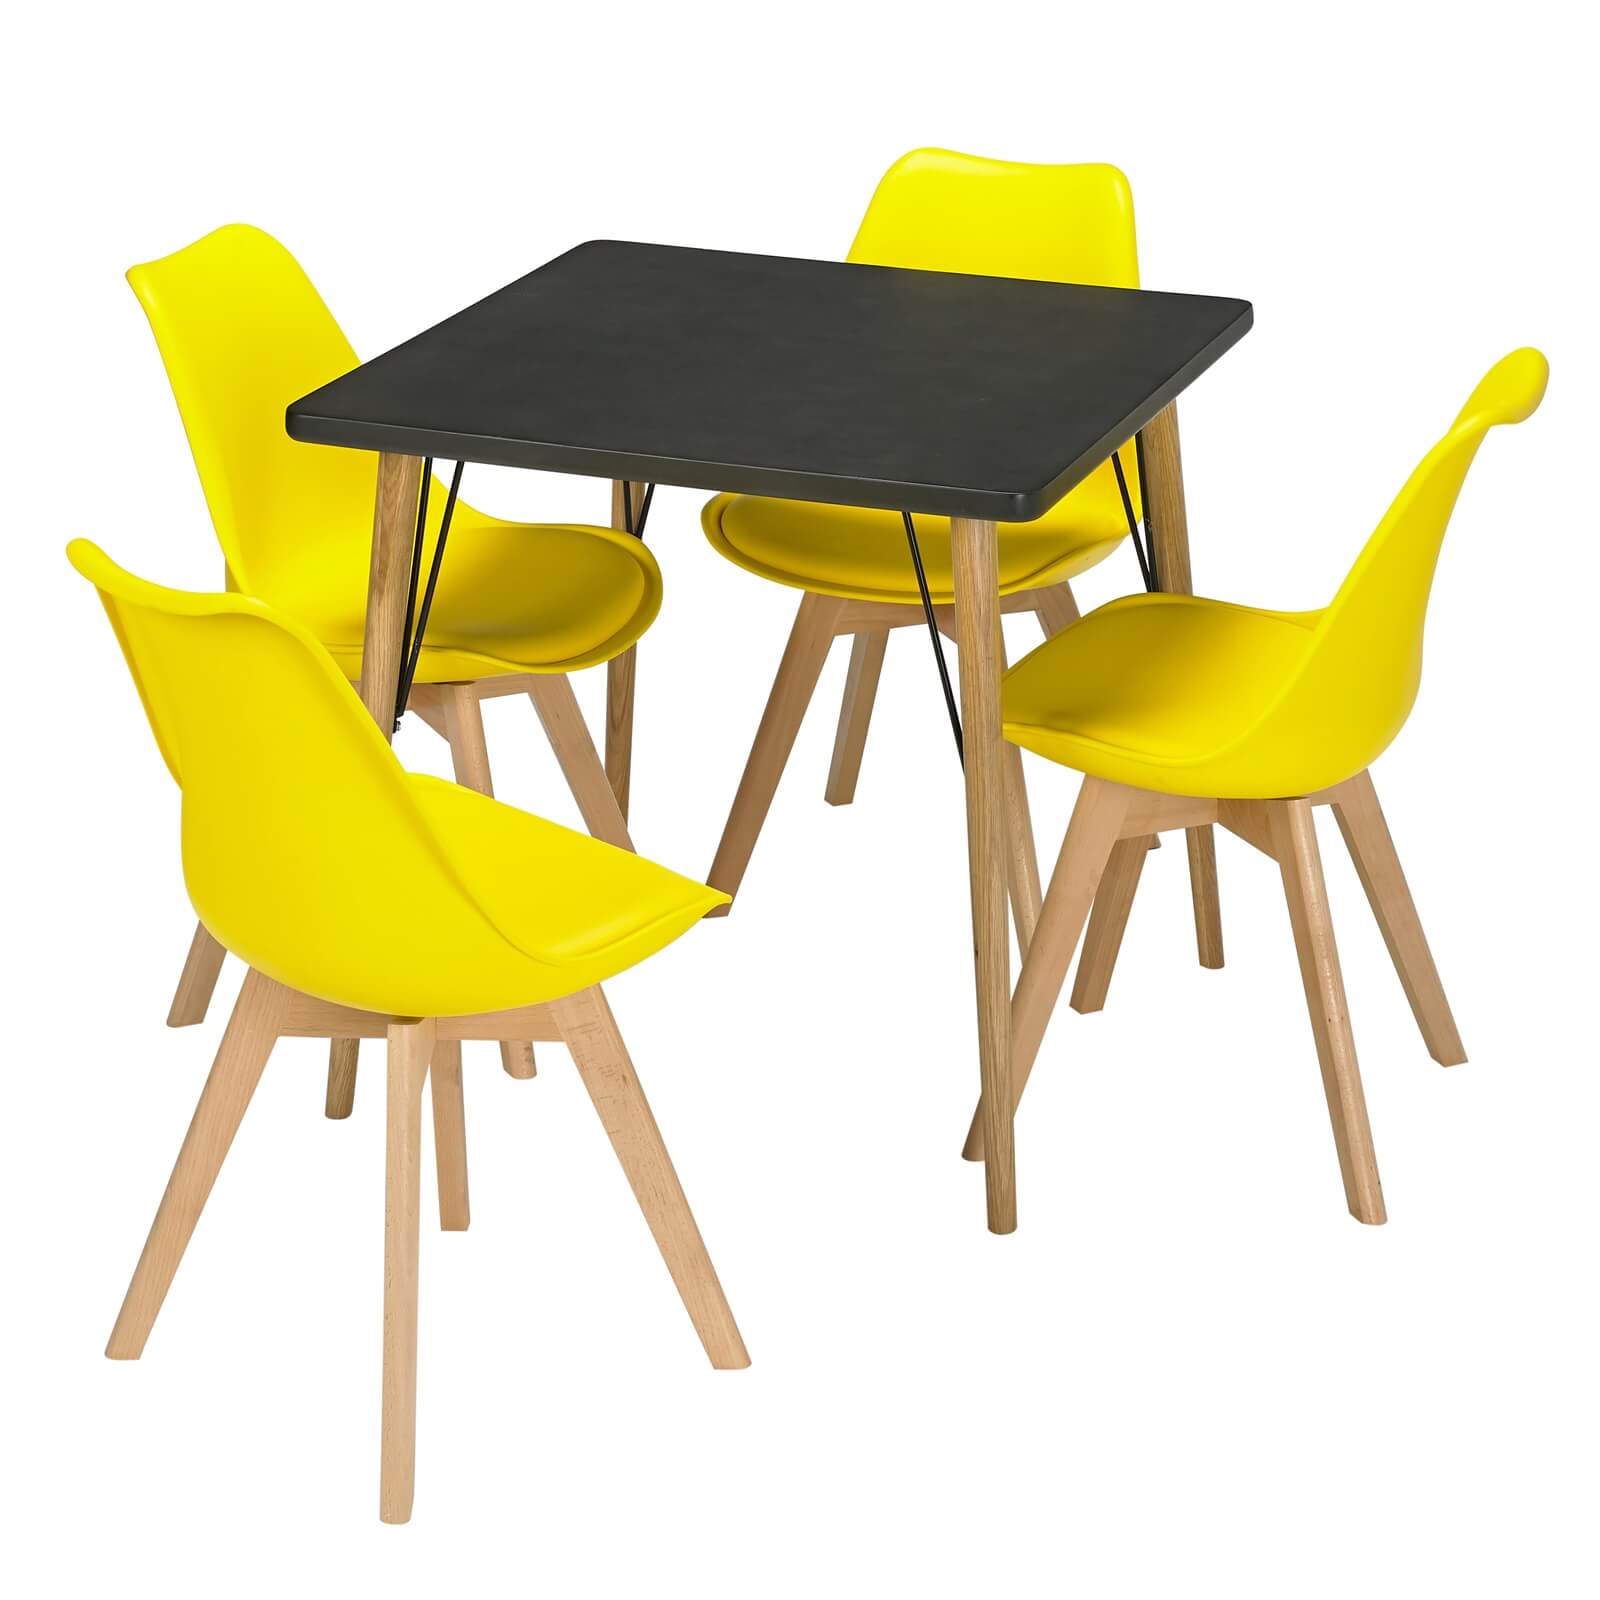 Mercer 4 Seater Dining Set - Louvre Dining Chairs - Yellow